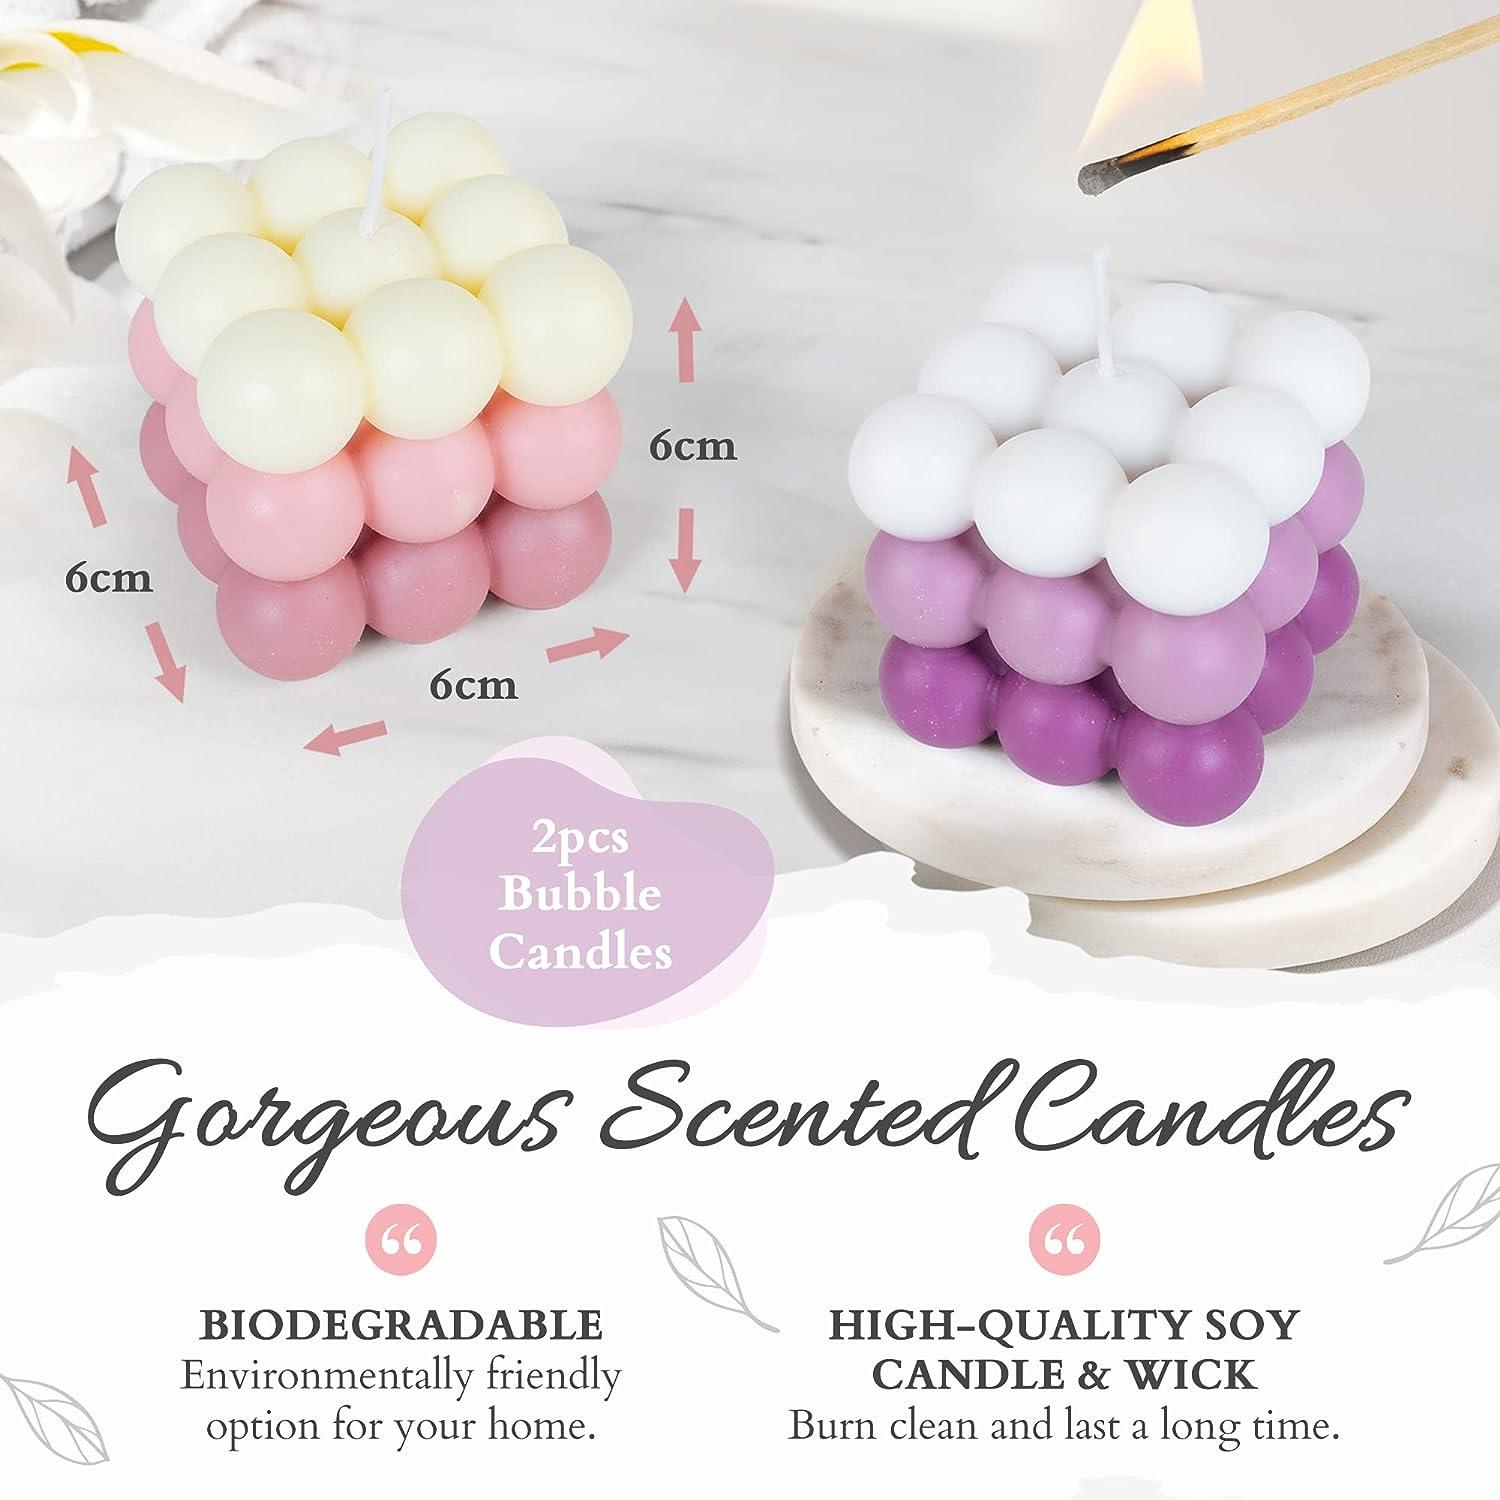 Bubble Candle with Bath Bombs Set - 2 Bubble Candles with 2 Bath Bombs for  Women - 2X Decorative Candles with 2X Bathbomb Gift Set - Cube Shaped  Candles Aesthetic Decor Pink & Purple